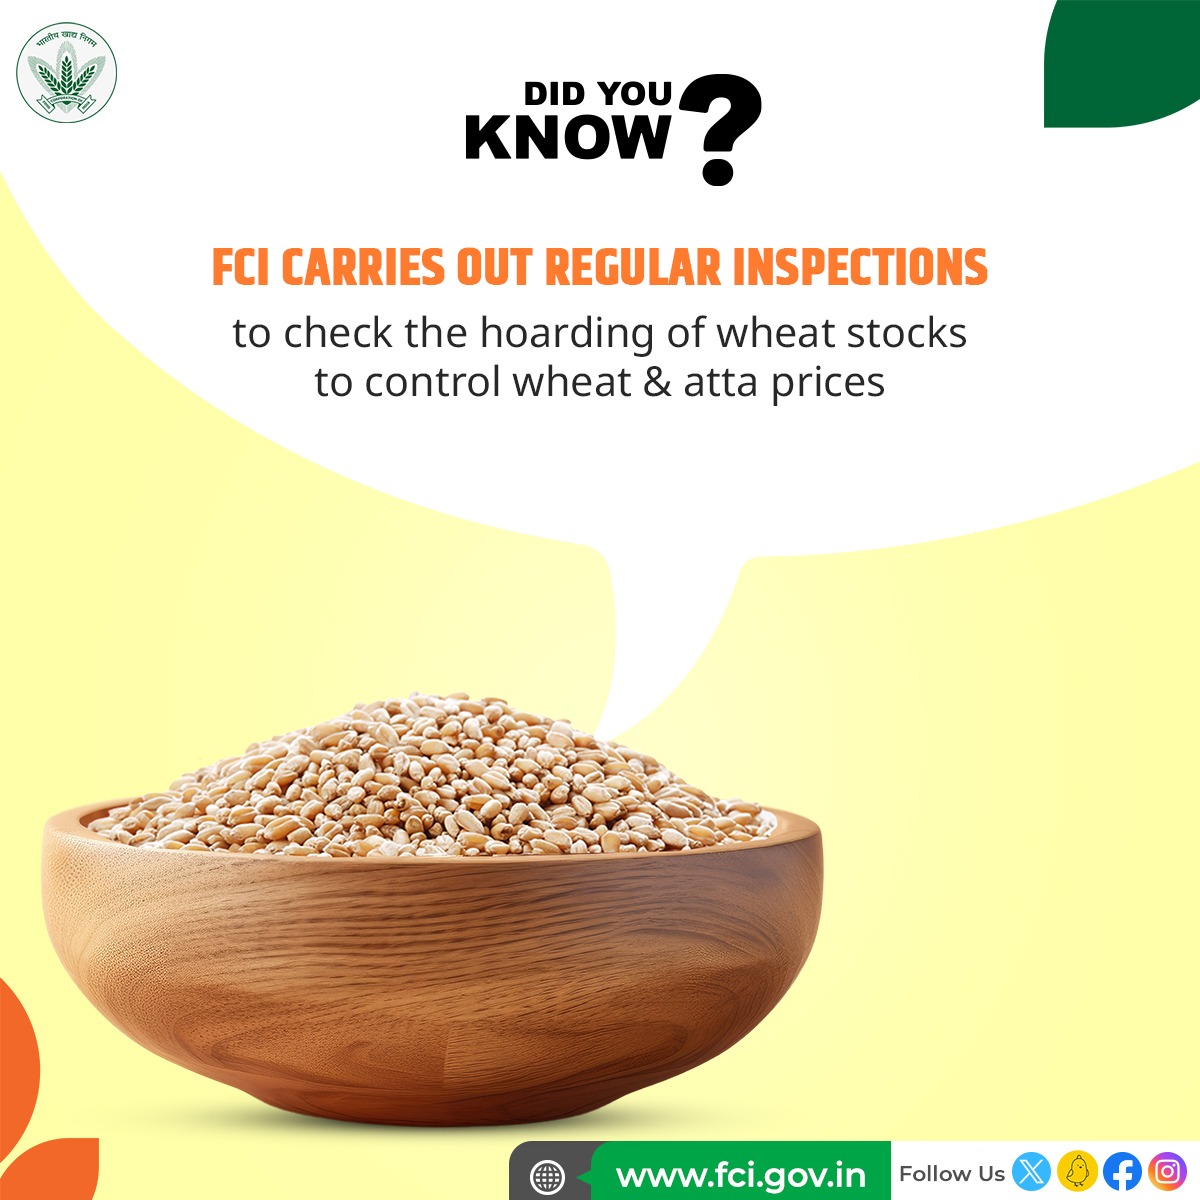 FCI is taking vital measures to curb inflationary trend in the market. FCI conducts regular inspections at flour mills to ensure stocks are not being hoarded and wheat is available at stable prices at the retail market.